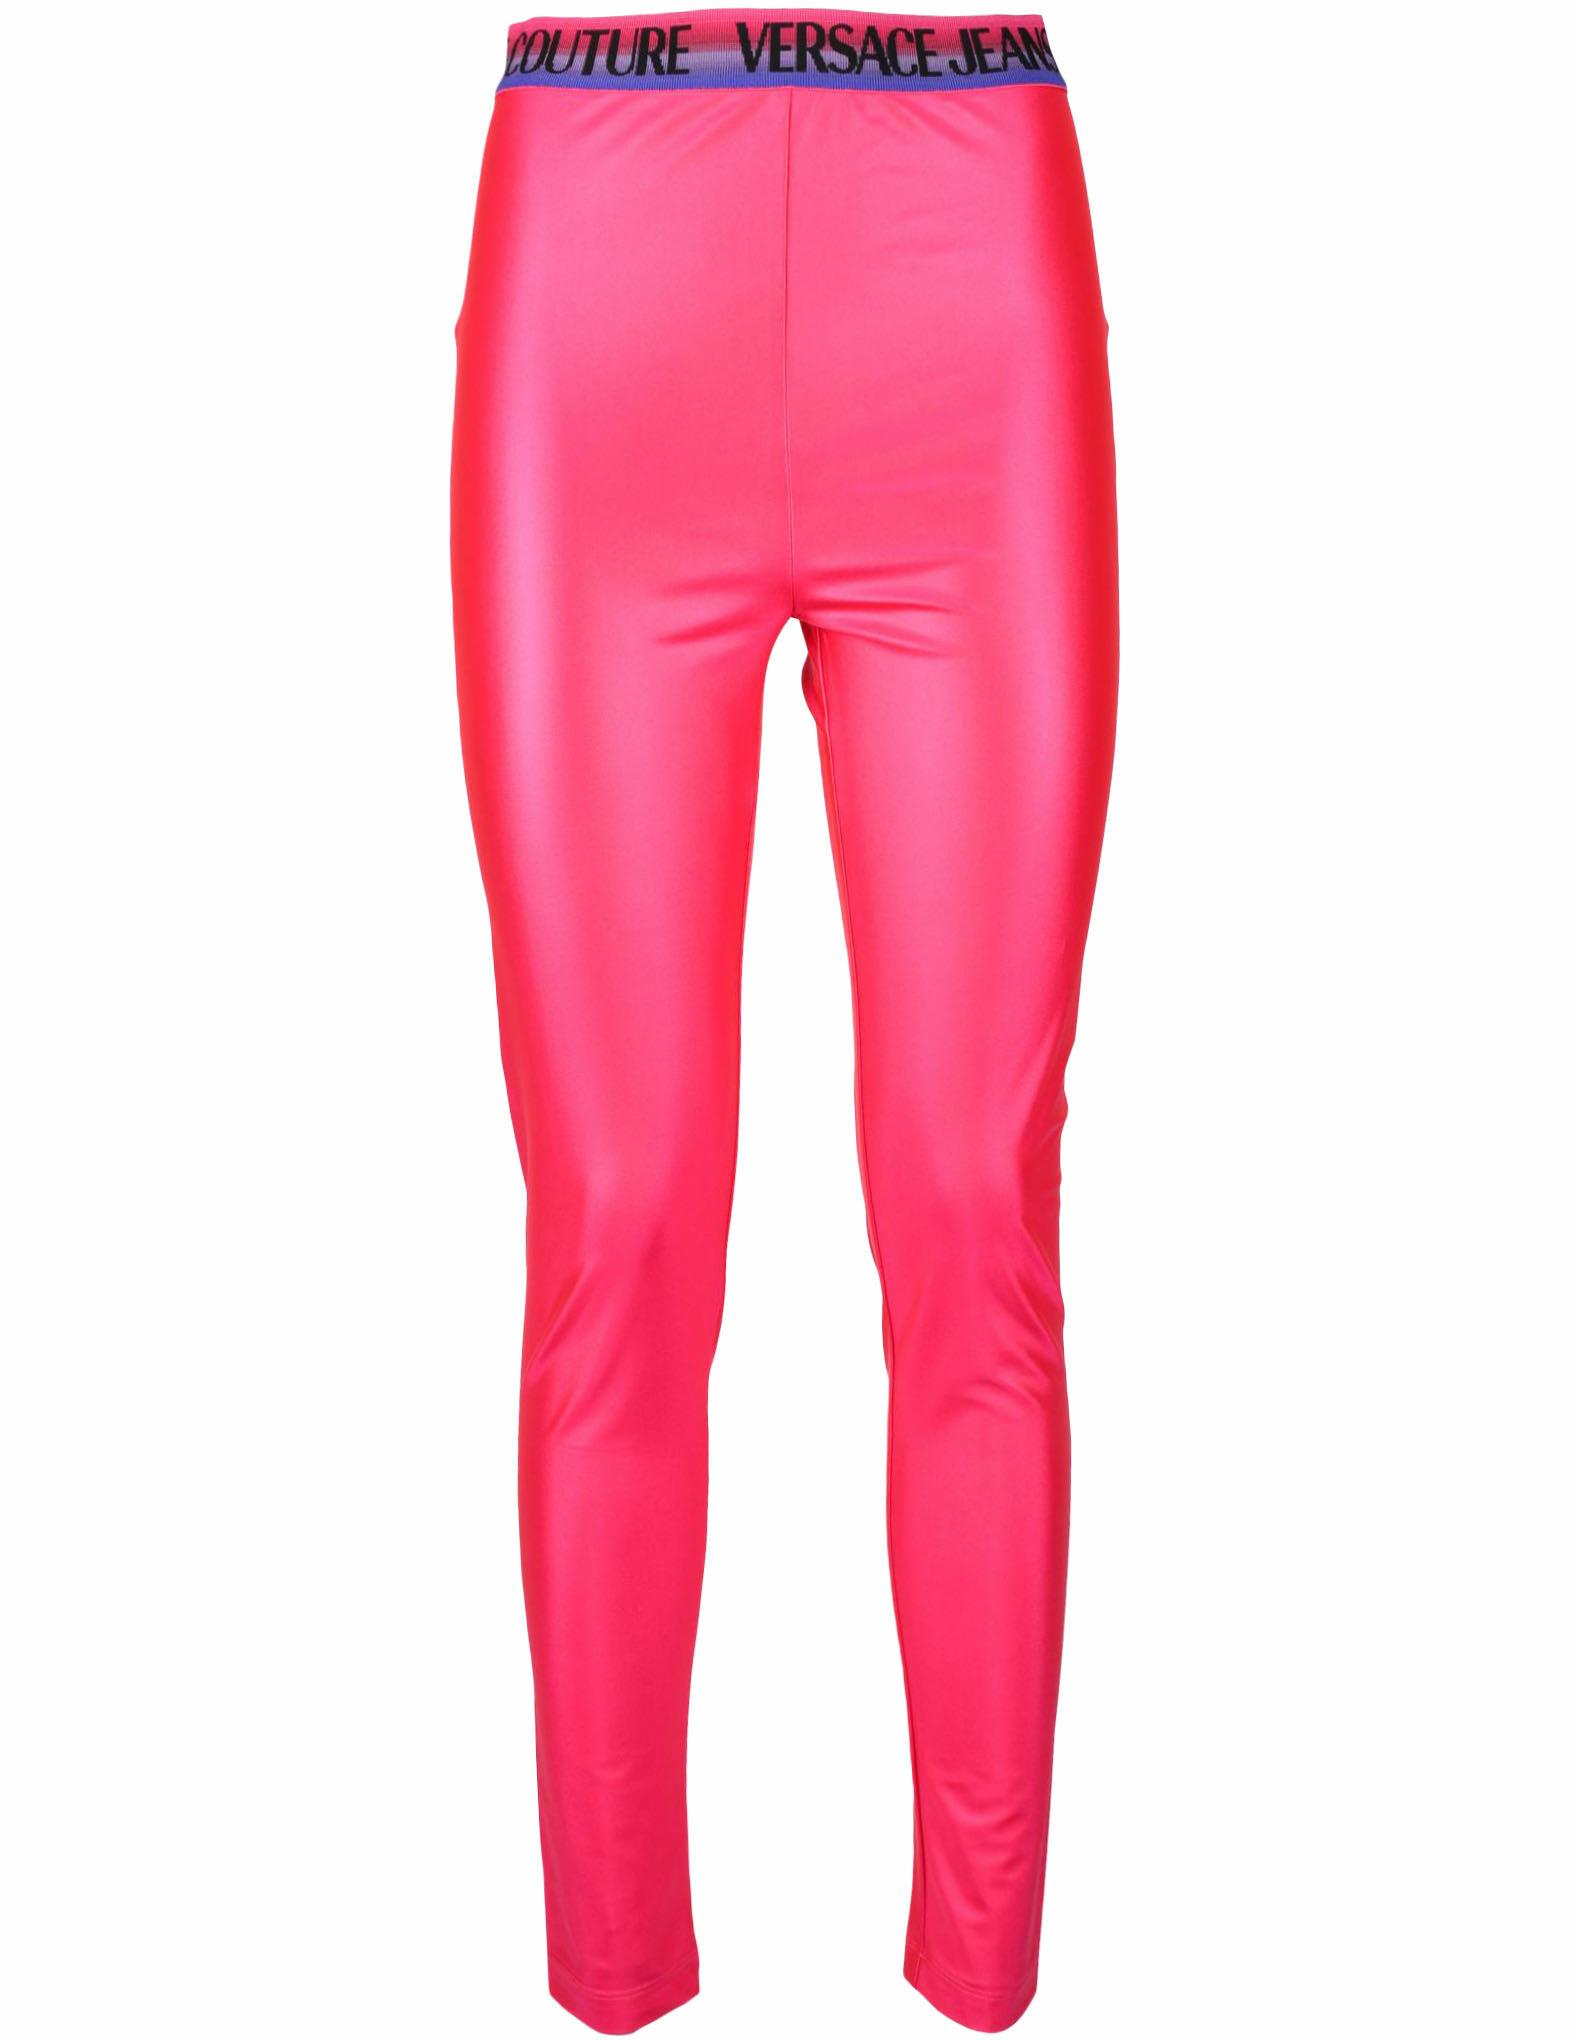 Versace Jeans Couture Women's Fuchsia Leggings 40 IT at FORZIERI